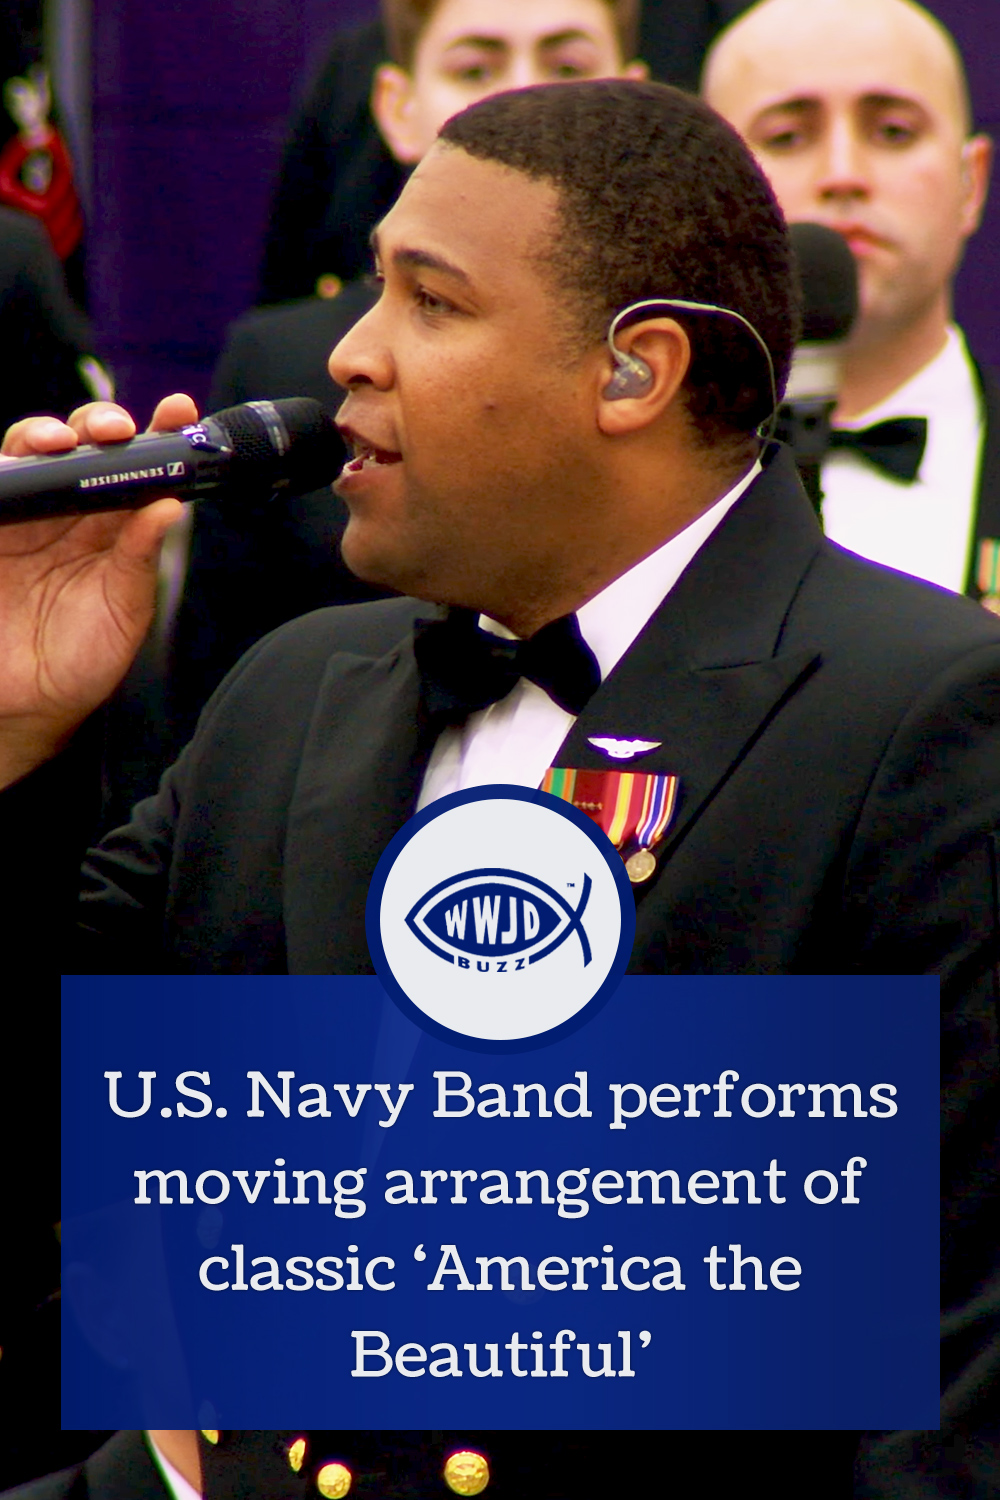 U.S. Navy Band performs moving arrangement of classic ‘America the Beautiful’